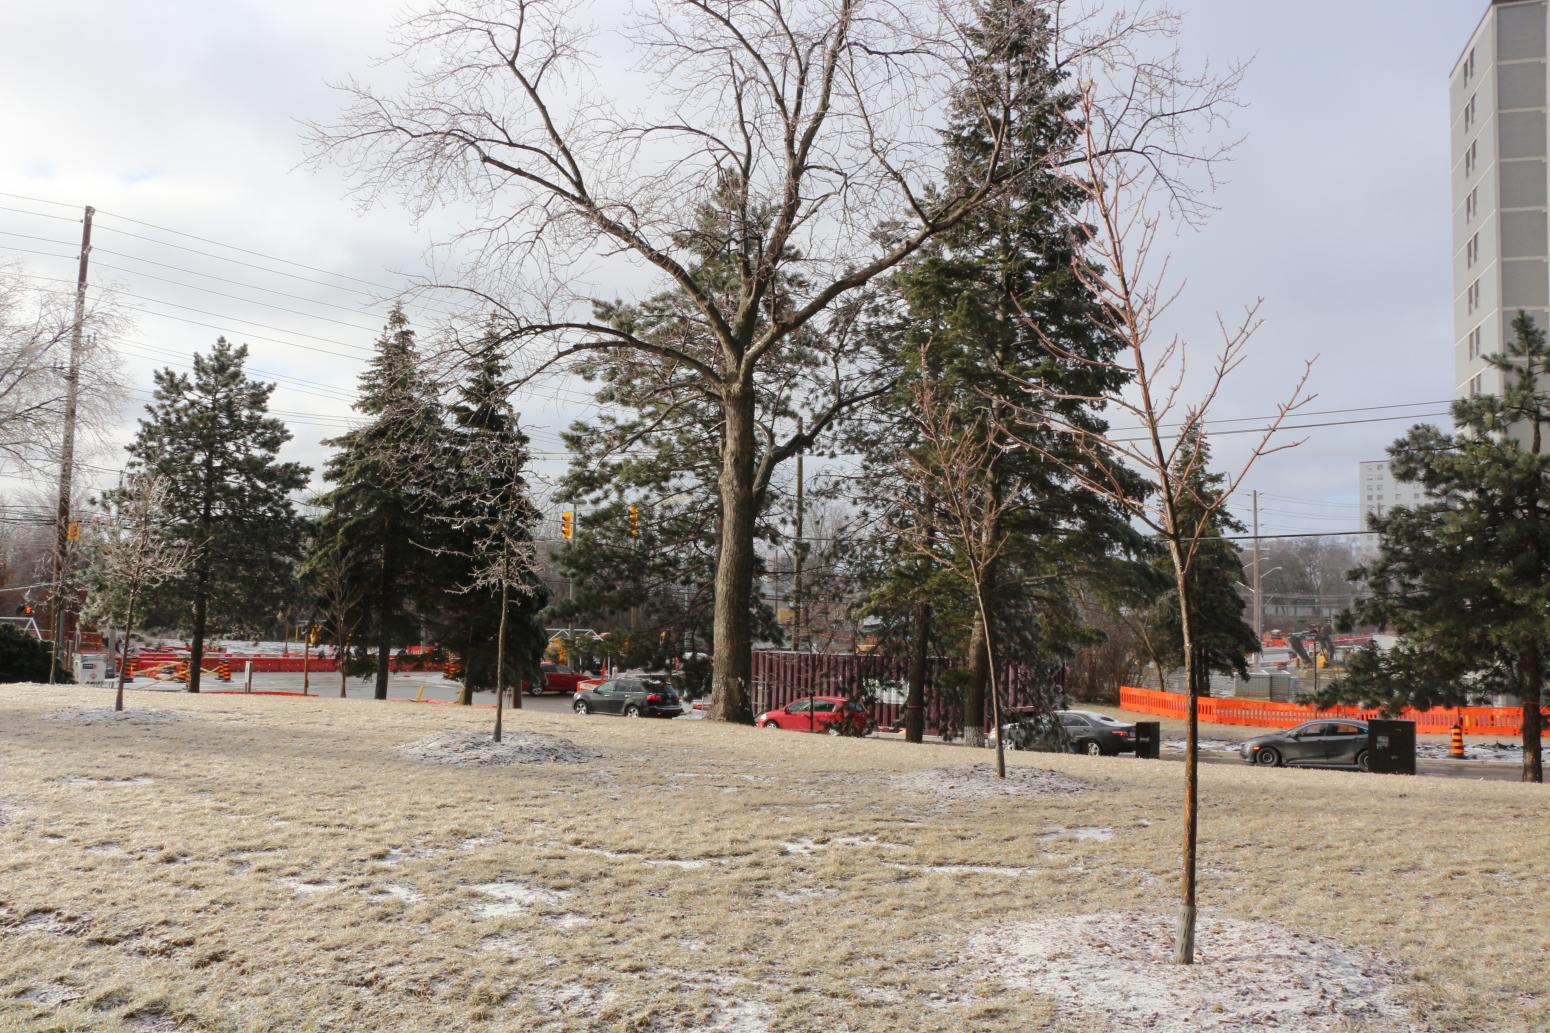 Community park with trees